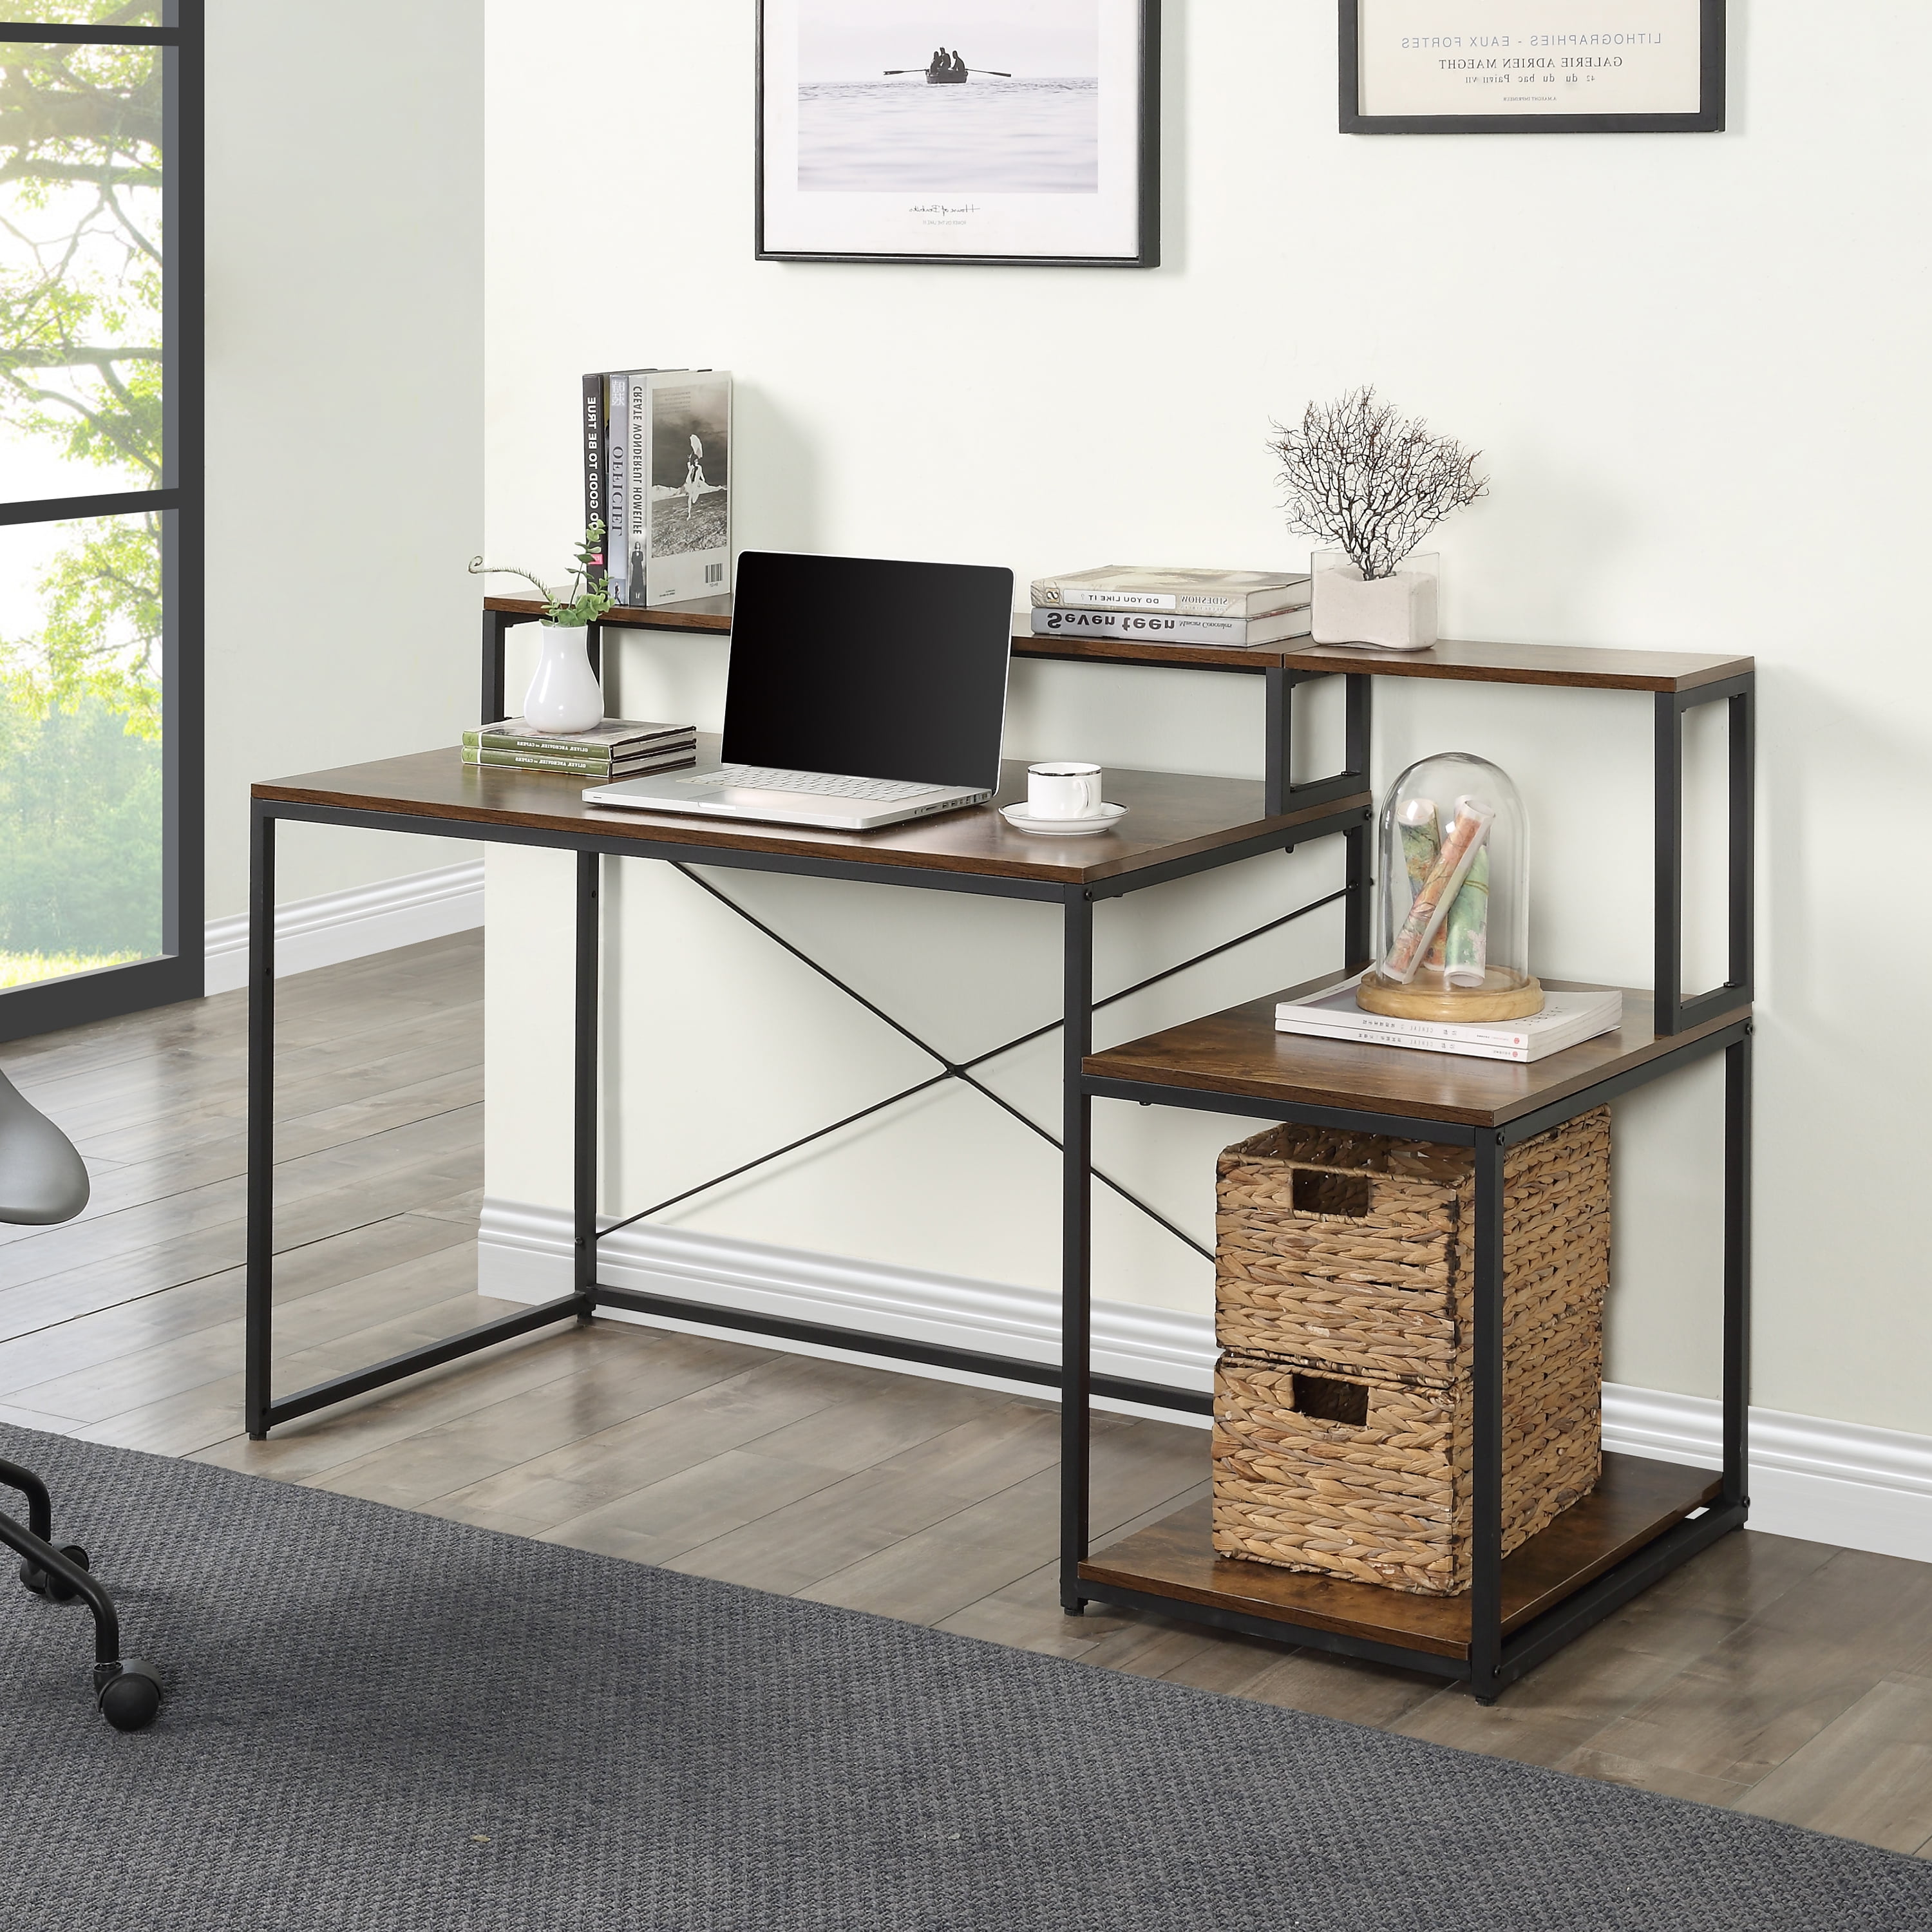 Details about   59" Rustic Office Desk Computer Studying Writing Table w/4-Tier Storage Shelves 